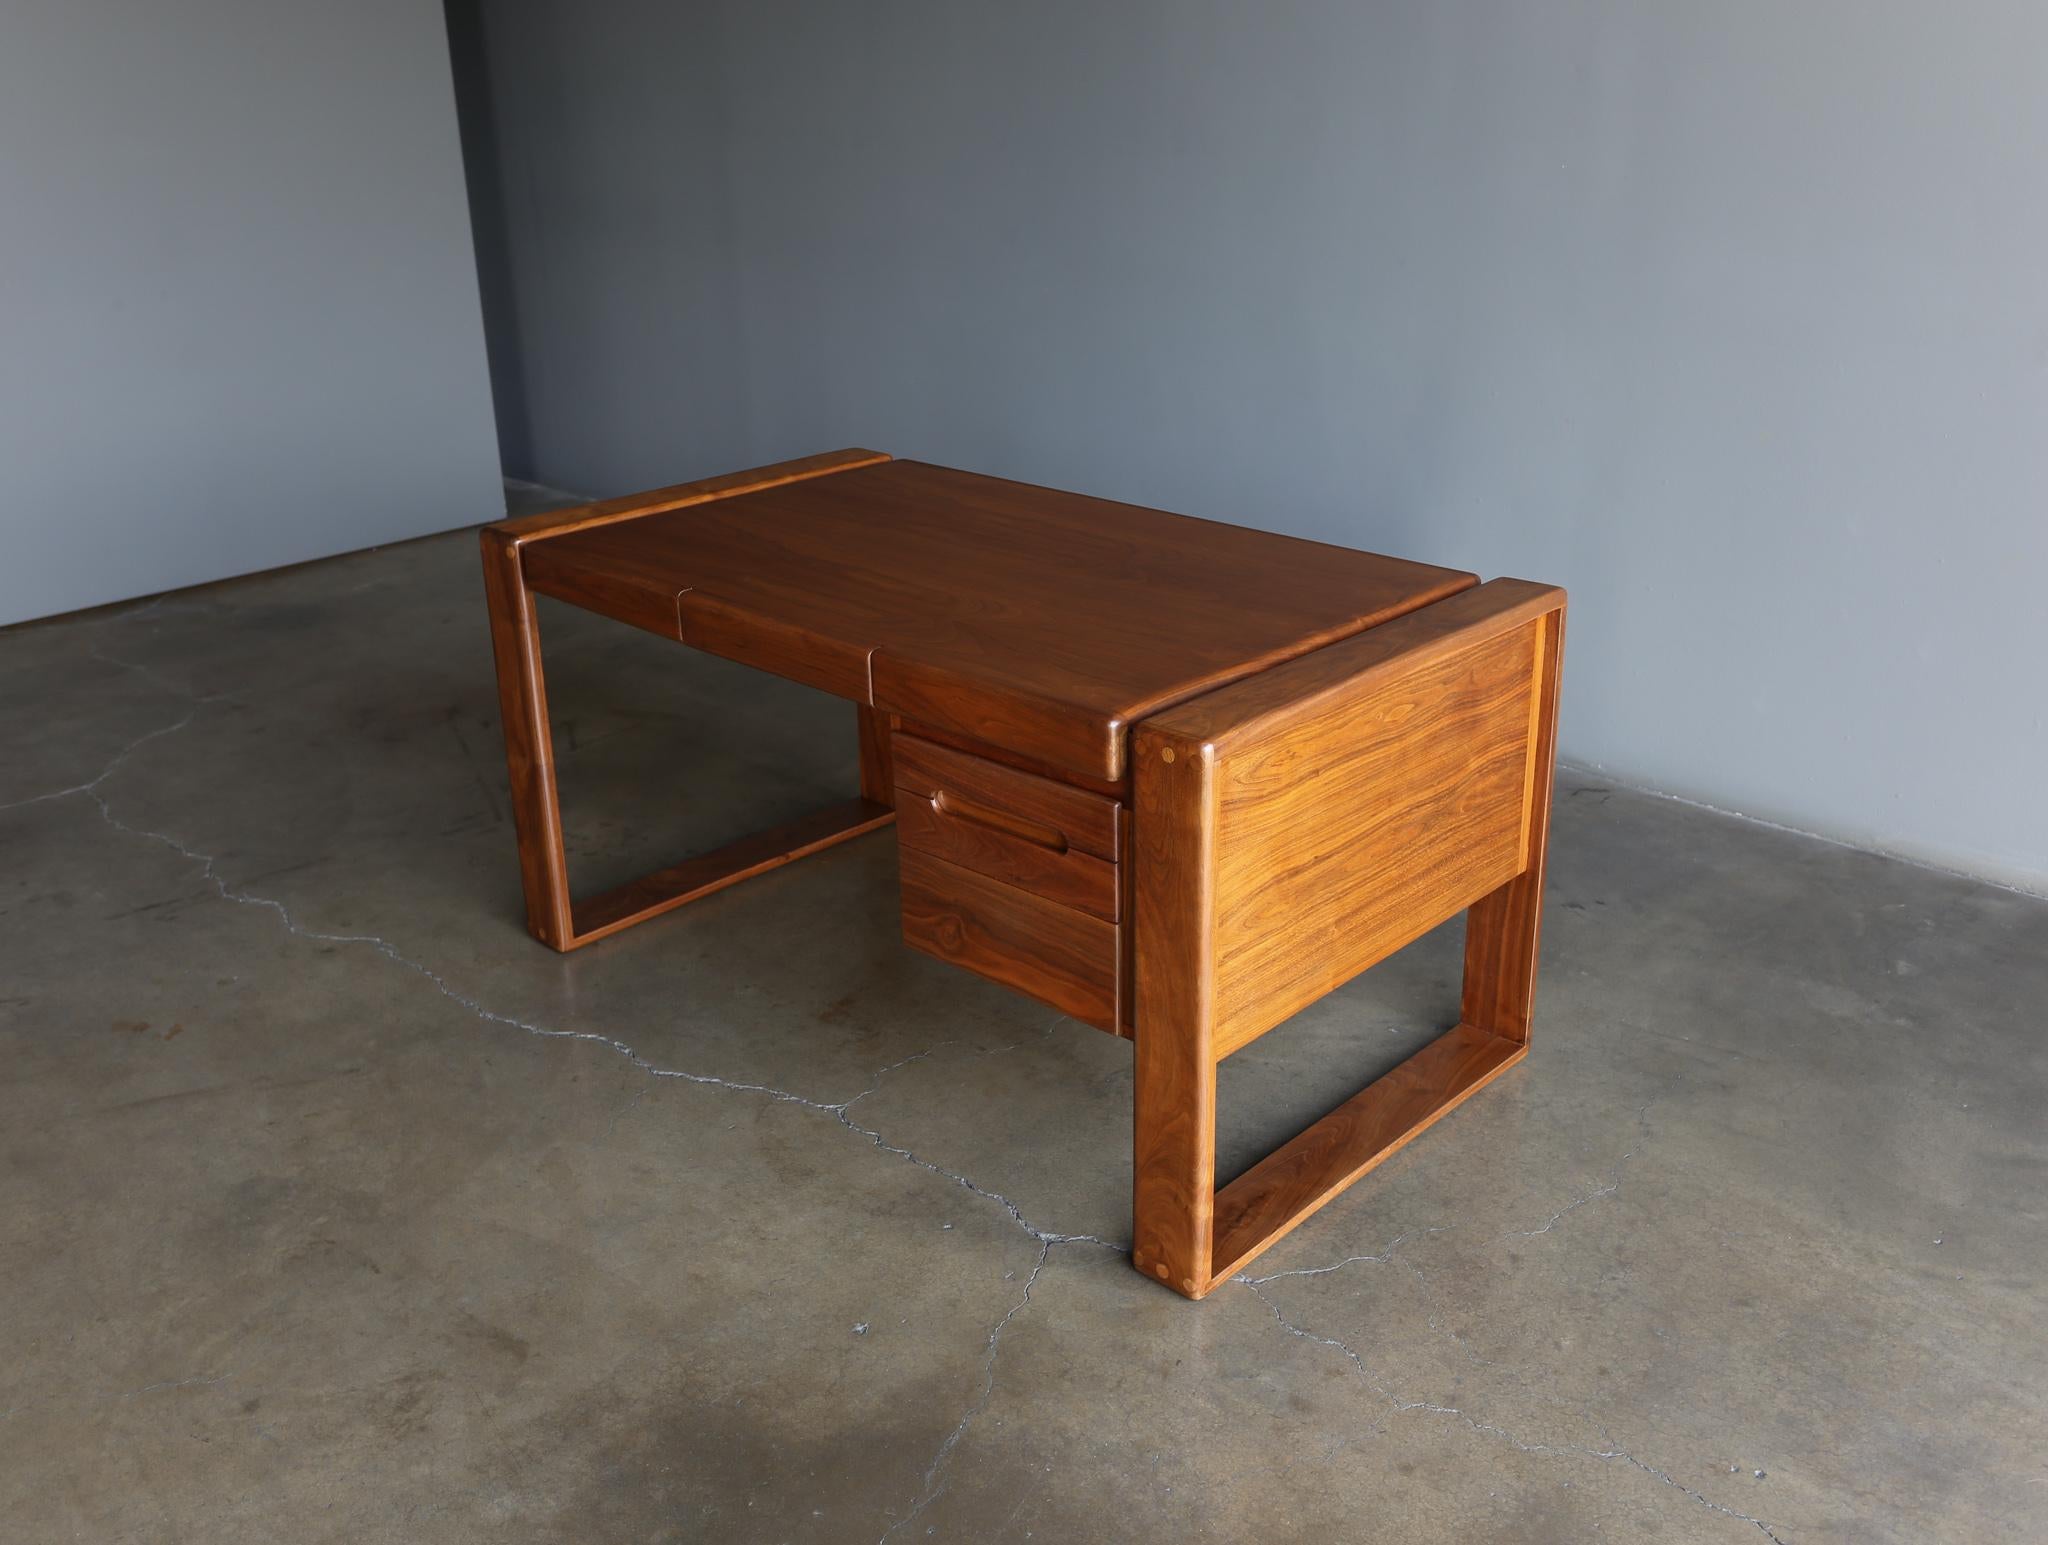 20th Century Lou Hodges Handcrafted Walnut Desk for California Design Group, 1979